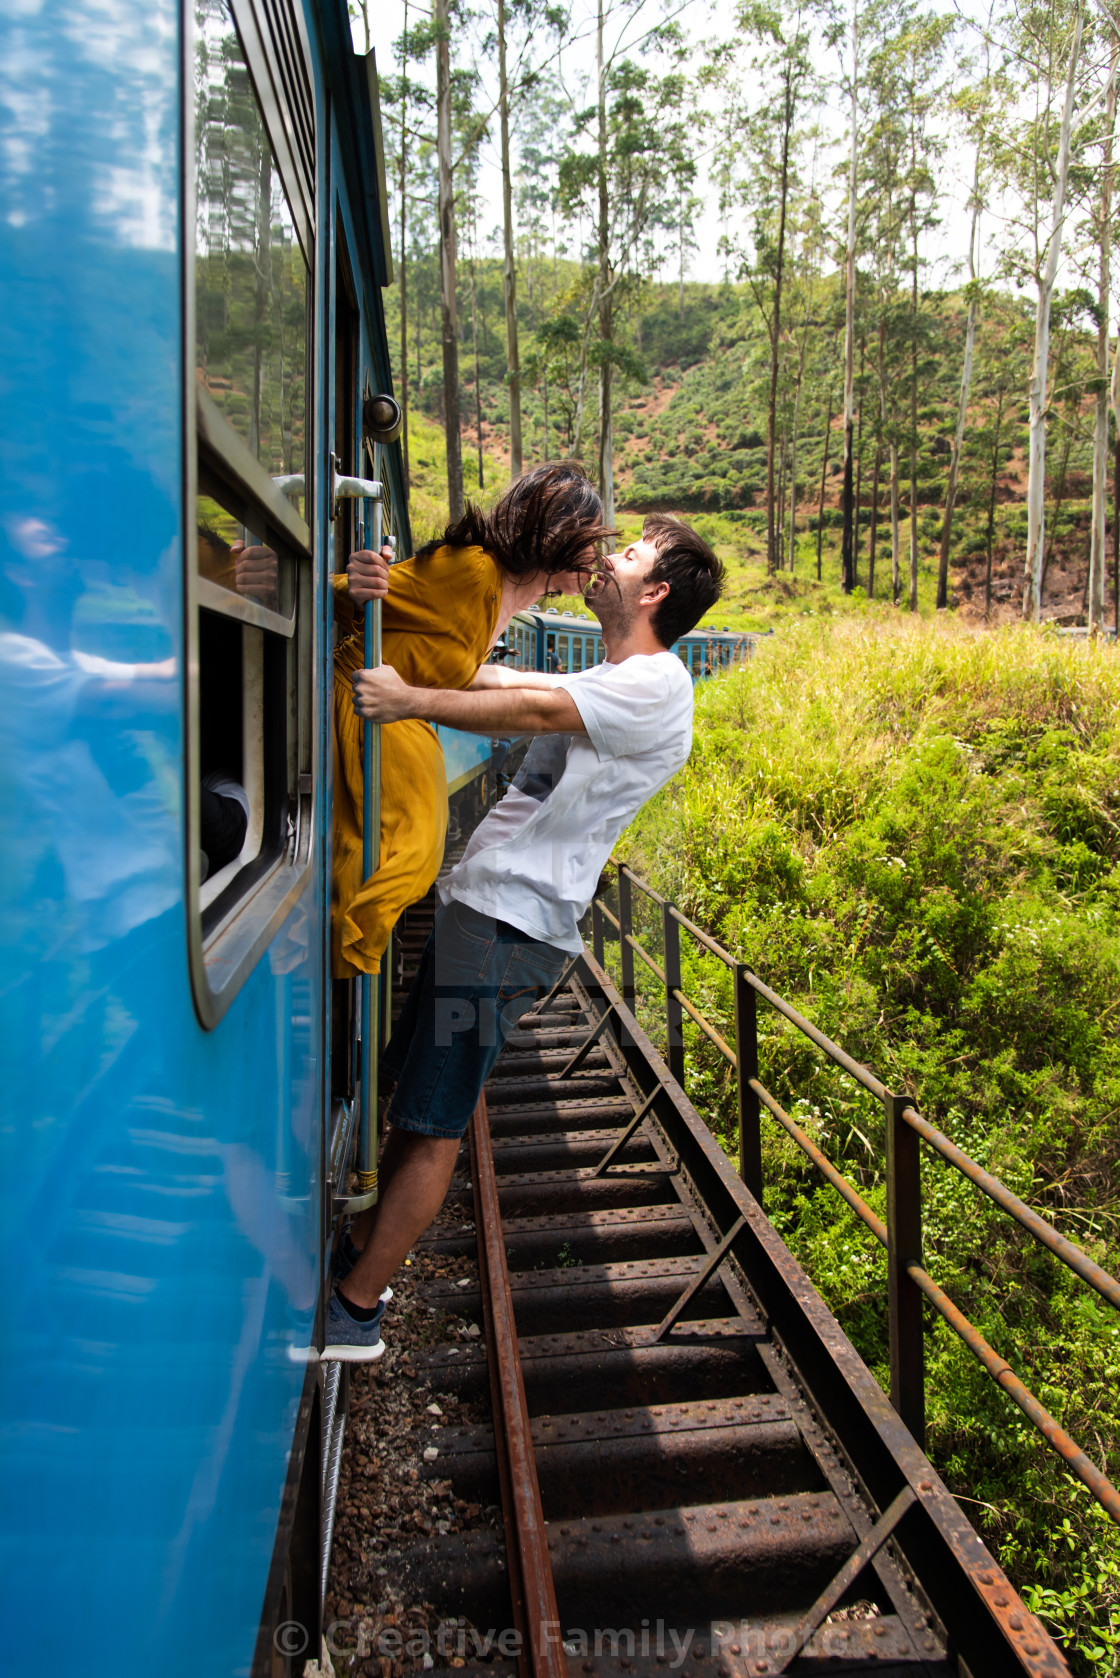 Couple kissing on a blue train in Sri Lanka, download or print for £20.01